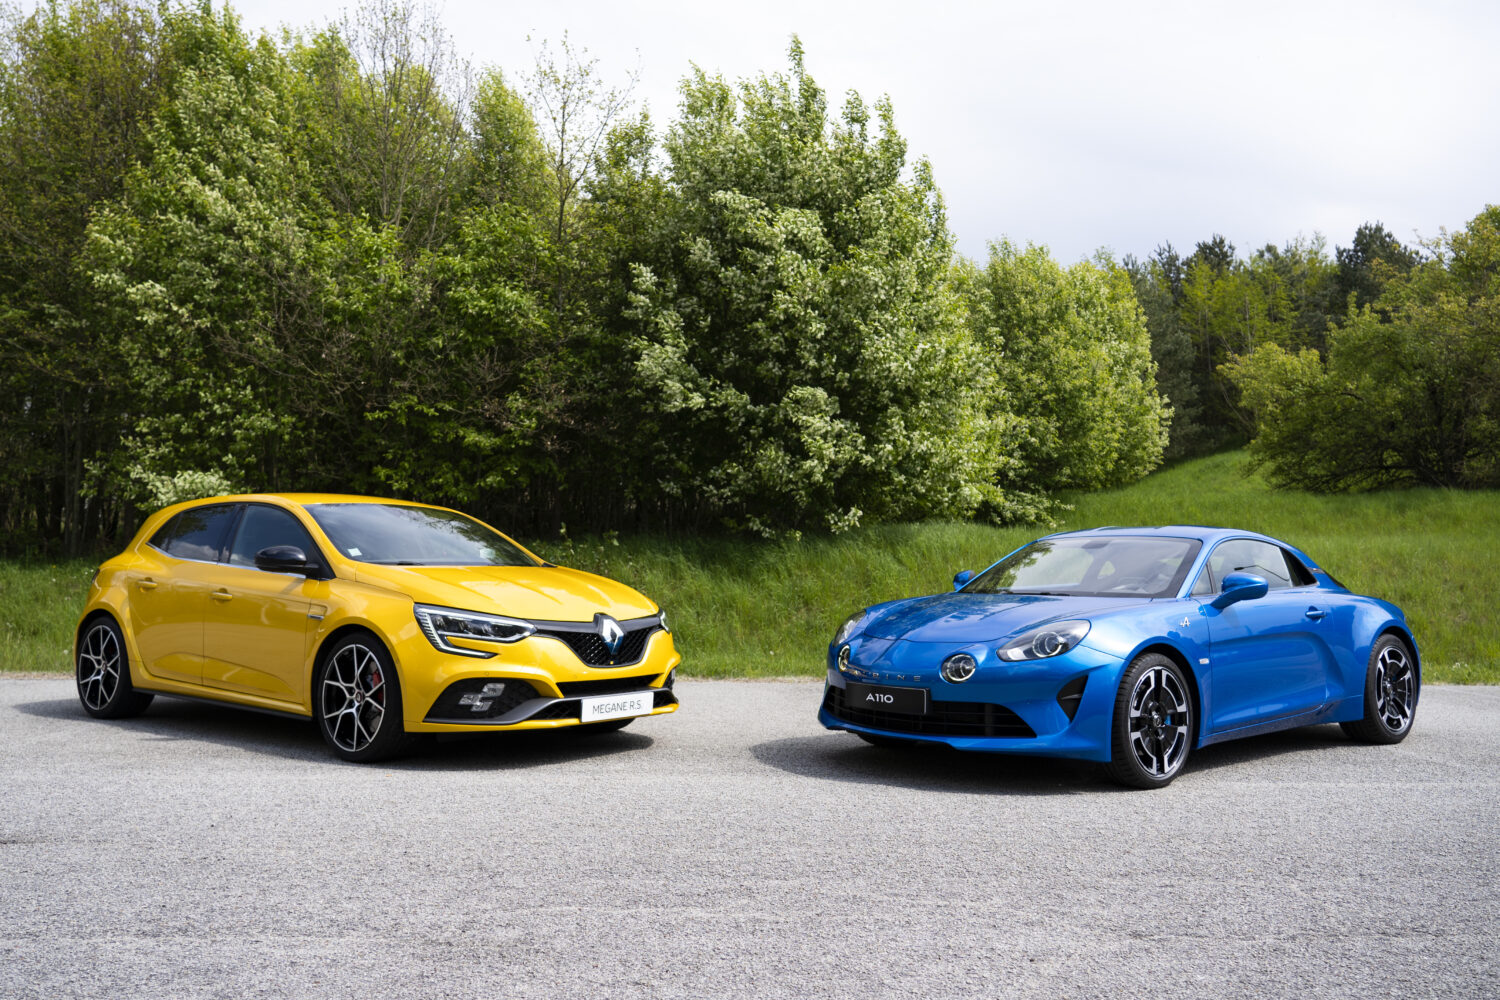 2021 - Renault Sport Cars becomes Alpine Cars